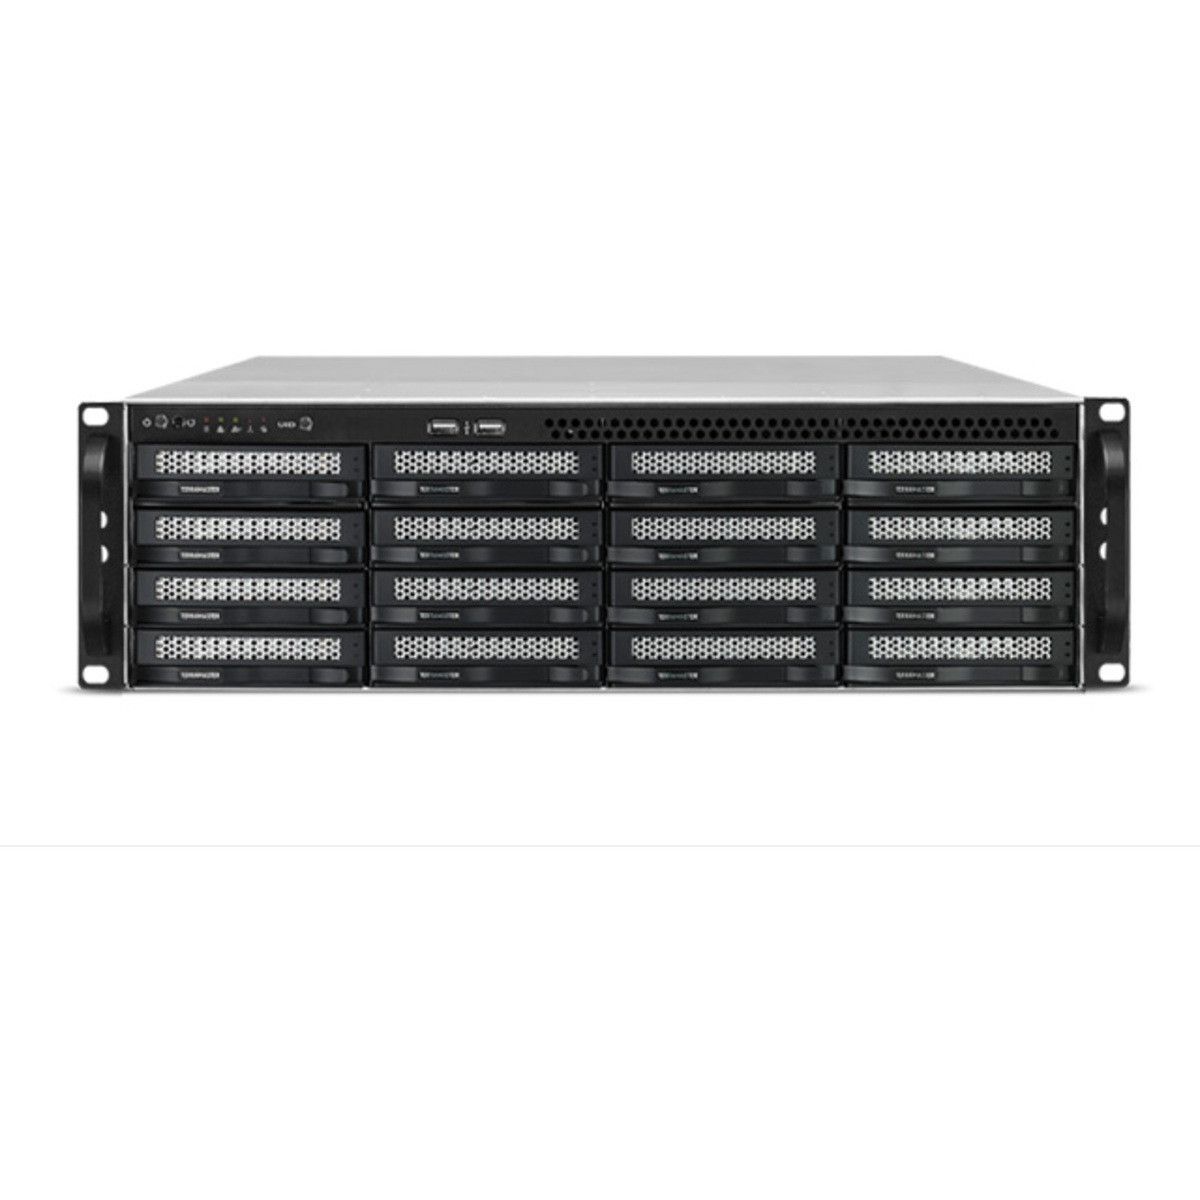 TerraMaster U16-722-2224 52tb 16-Bay RackMount Large Business / Enterprise NAS - Network Attached Storage Device 13x4tb Western Digital Red SA500 WDS400T1R0A 2.5 560/530MB/s SATA 6Gb/s SSD NAS Class Drives Installed - Burn-In Tested U16-722-2224